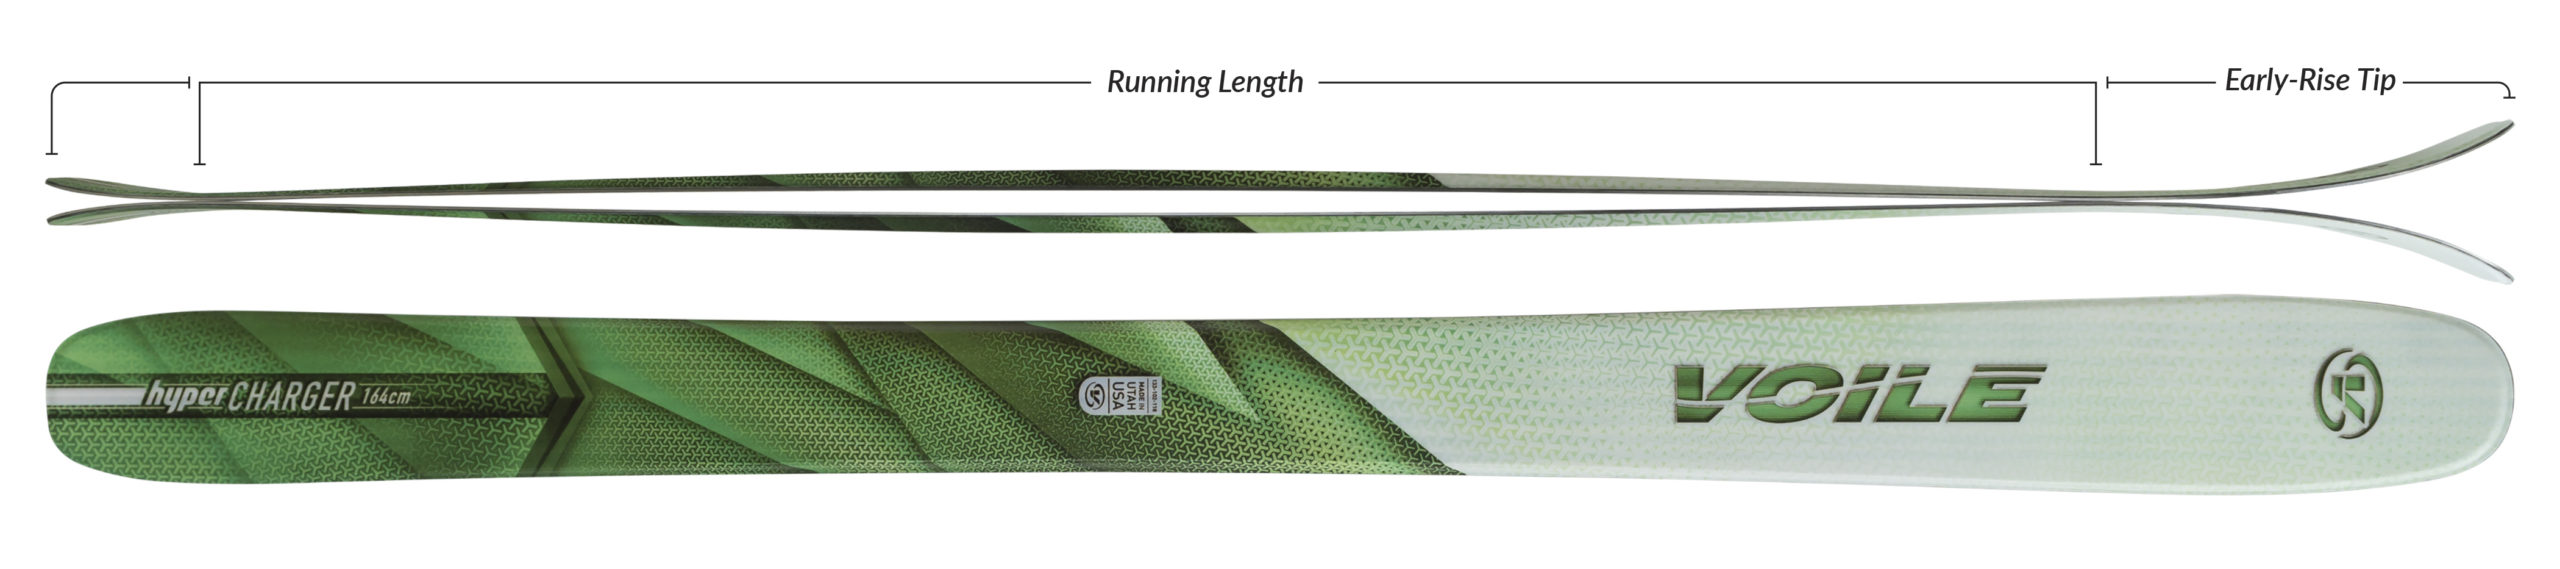 Voile Women's HyperCharger skis - Women's backcountry skis